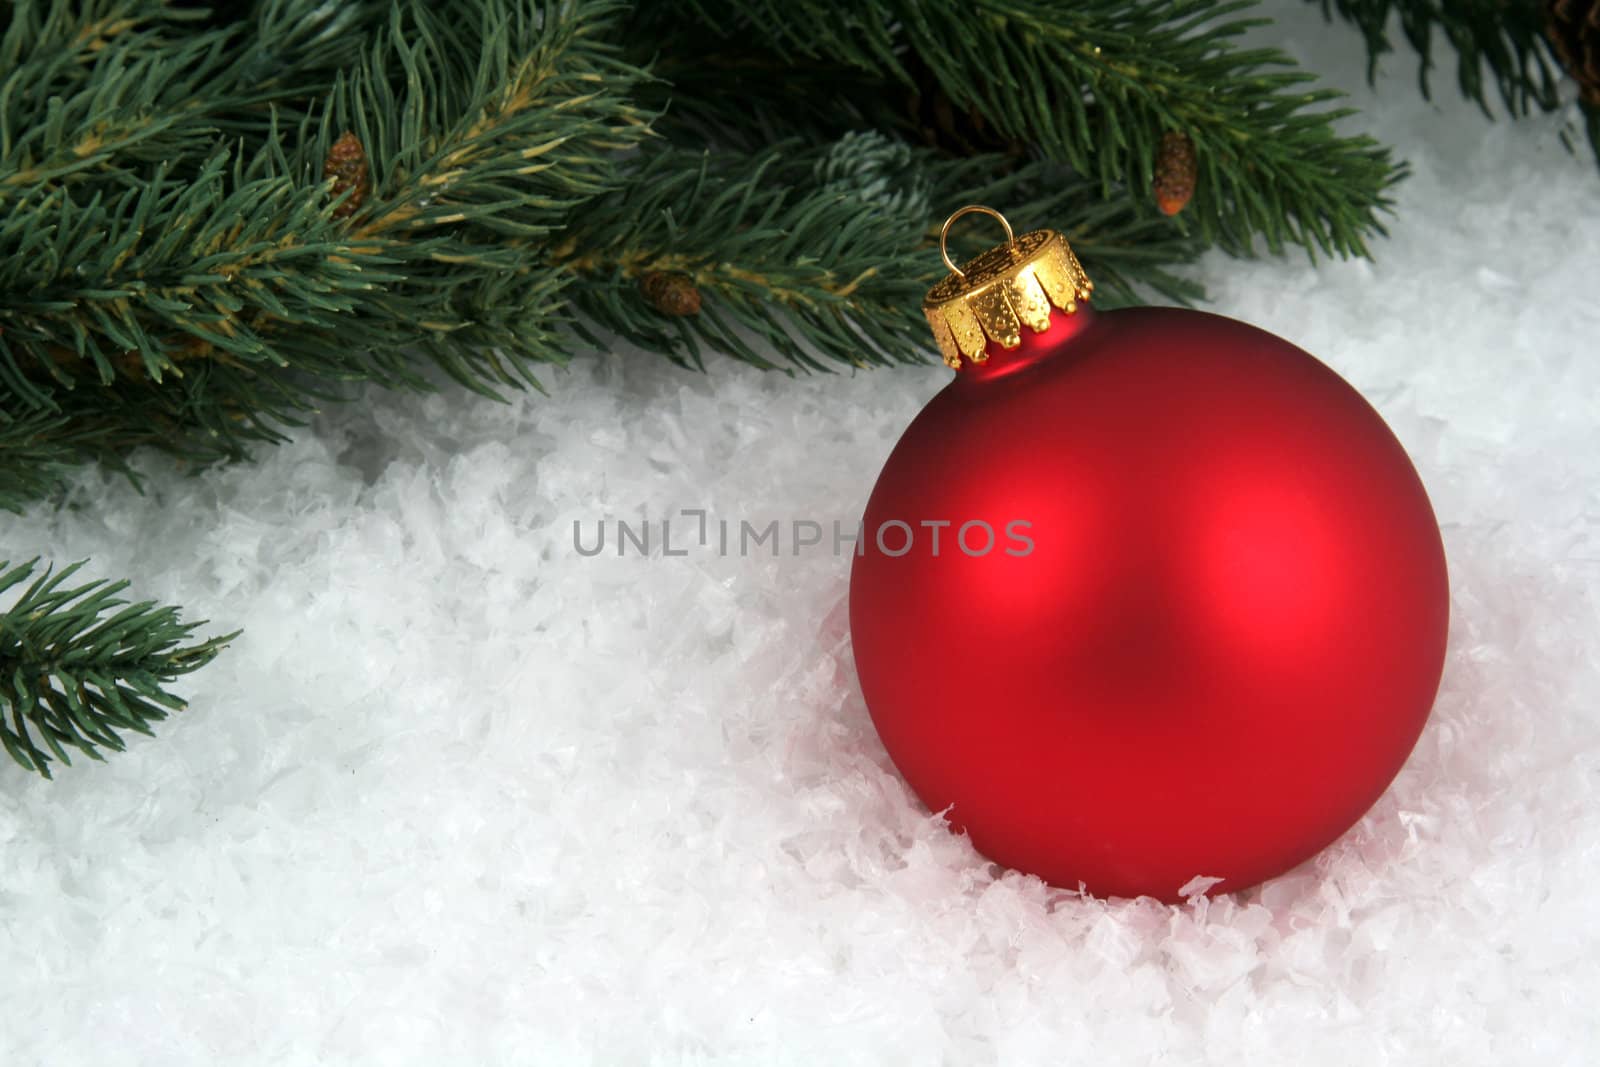 A red Christmas bauble sitting in a bed of snow with an evergreen branch.
